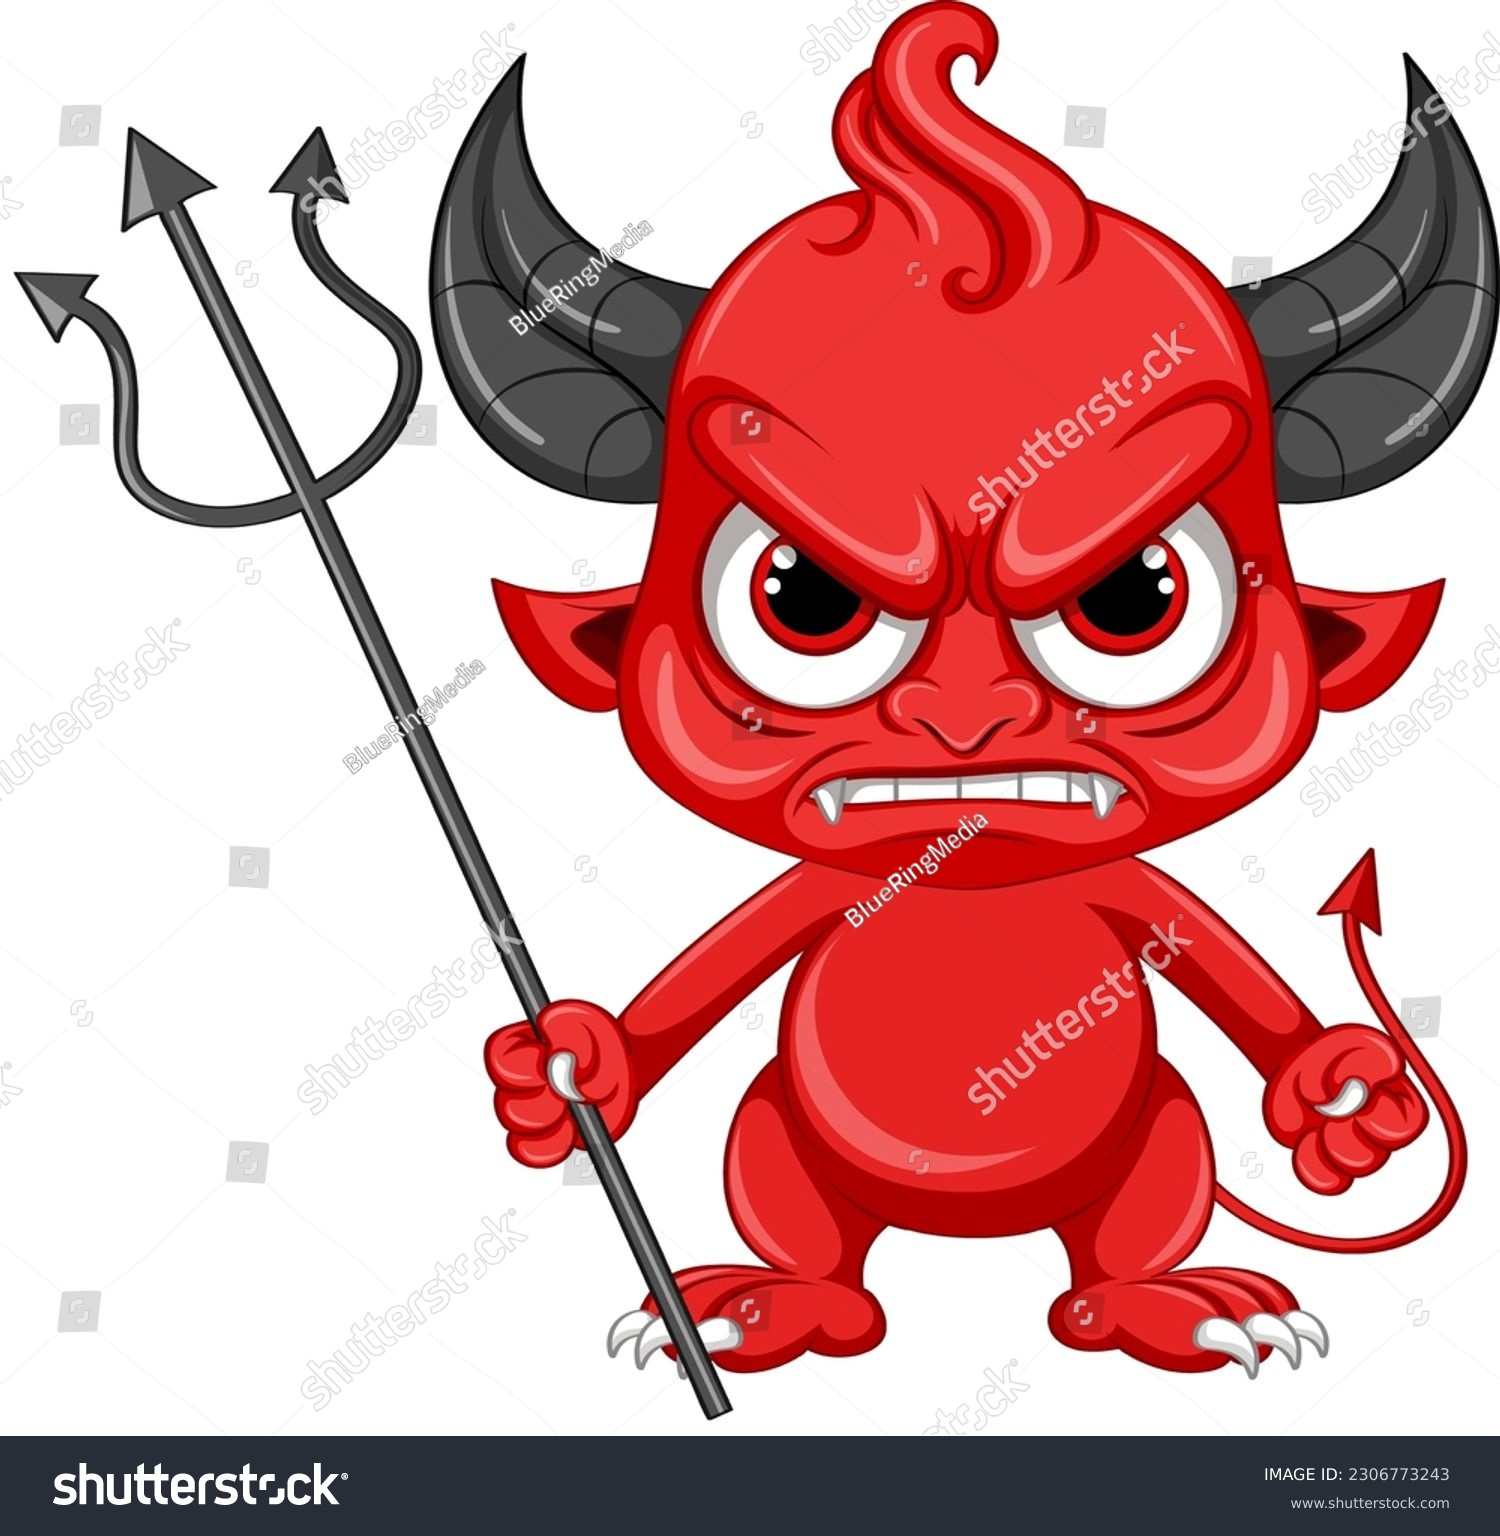 SVG of Angry devil cartoon character illustration svg